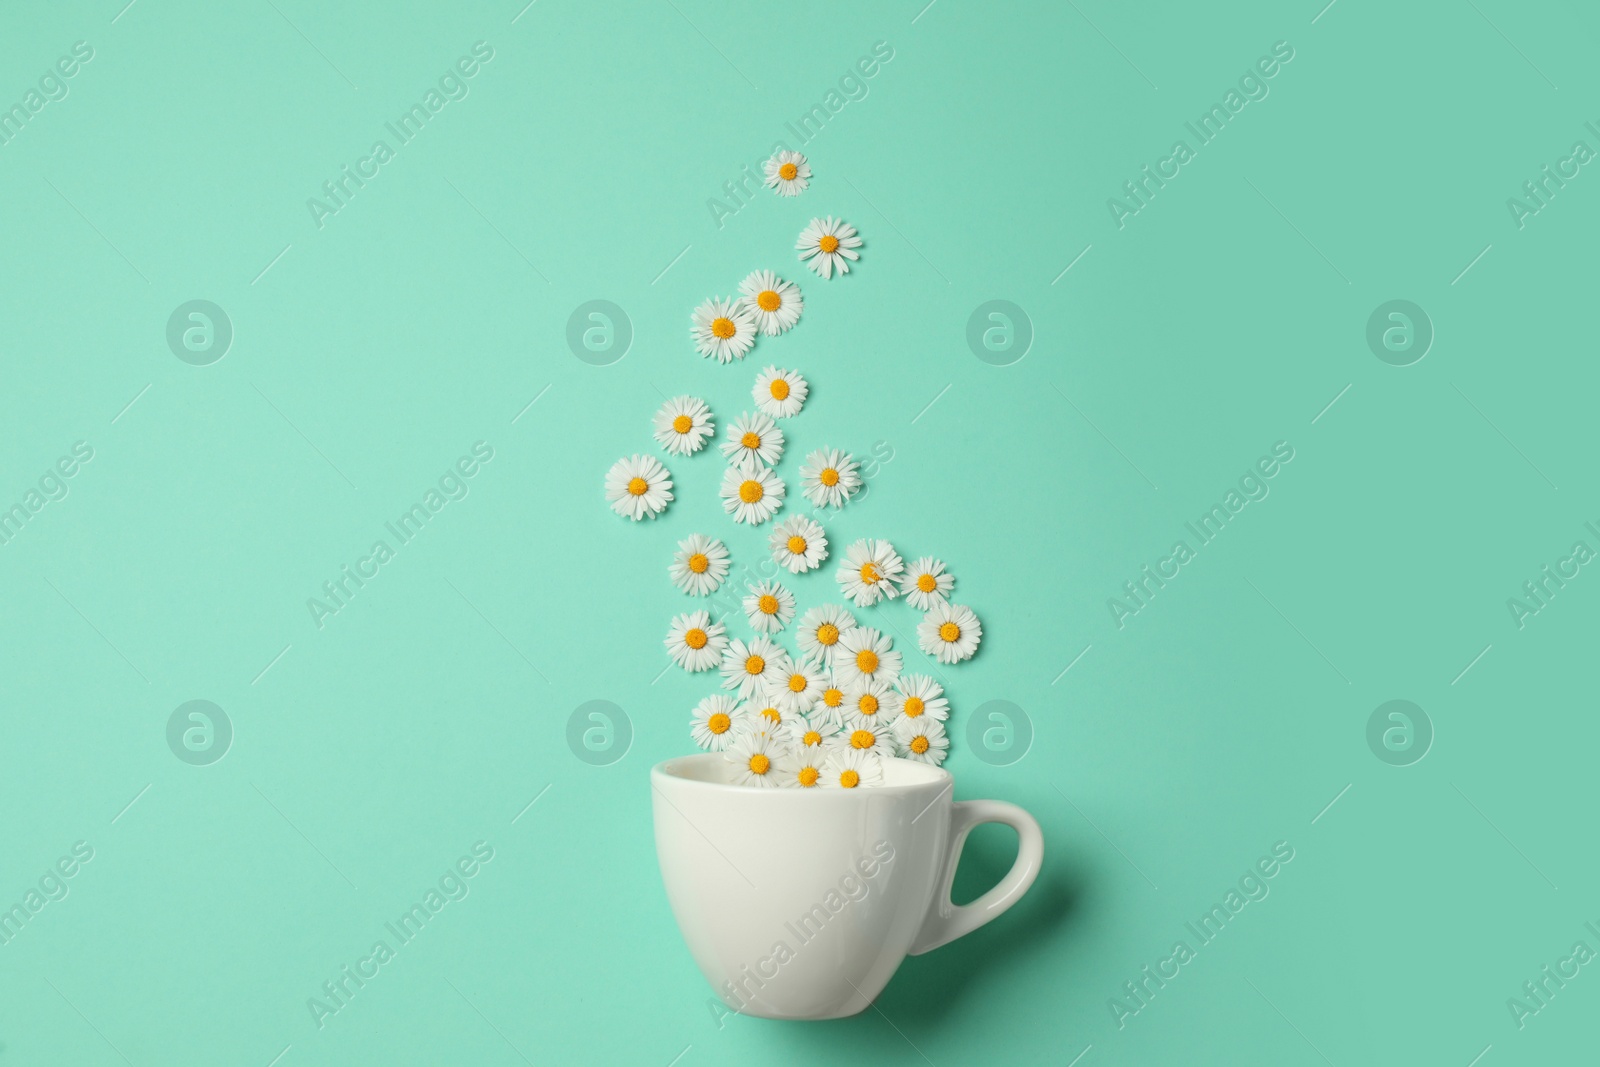 Photo of Flat lay composition with daisy flowers and ceramic cup on turquoise background